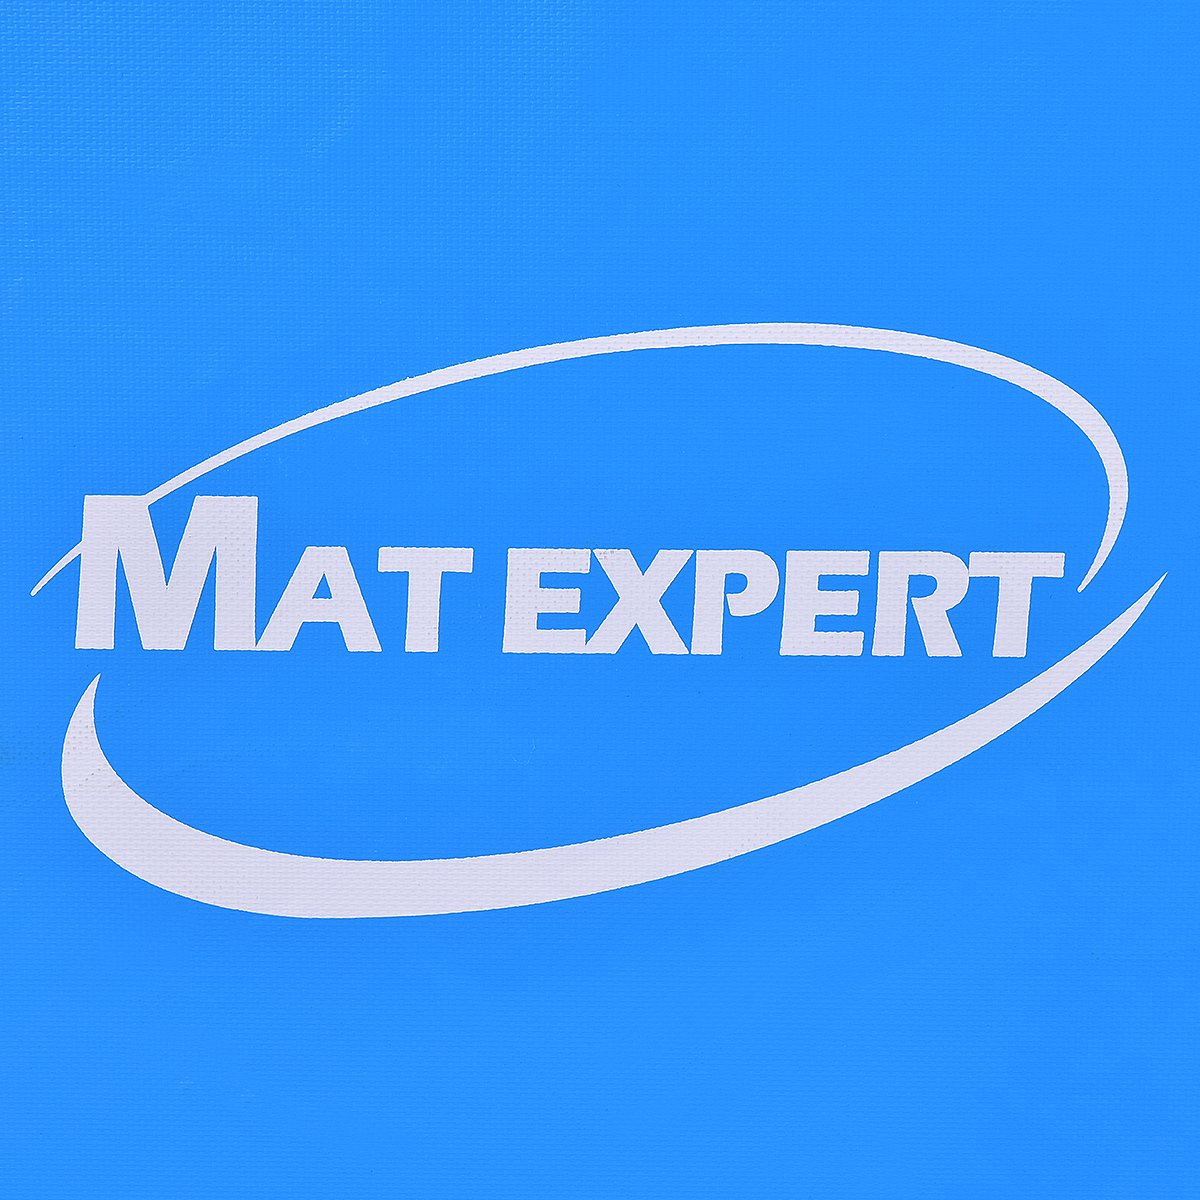 MAT EXPERT 3 in 1 Plyometric Box, Jumping Box with Foam for Jump Training and Conditioning